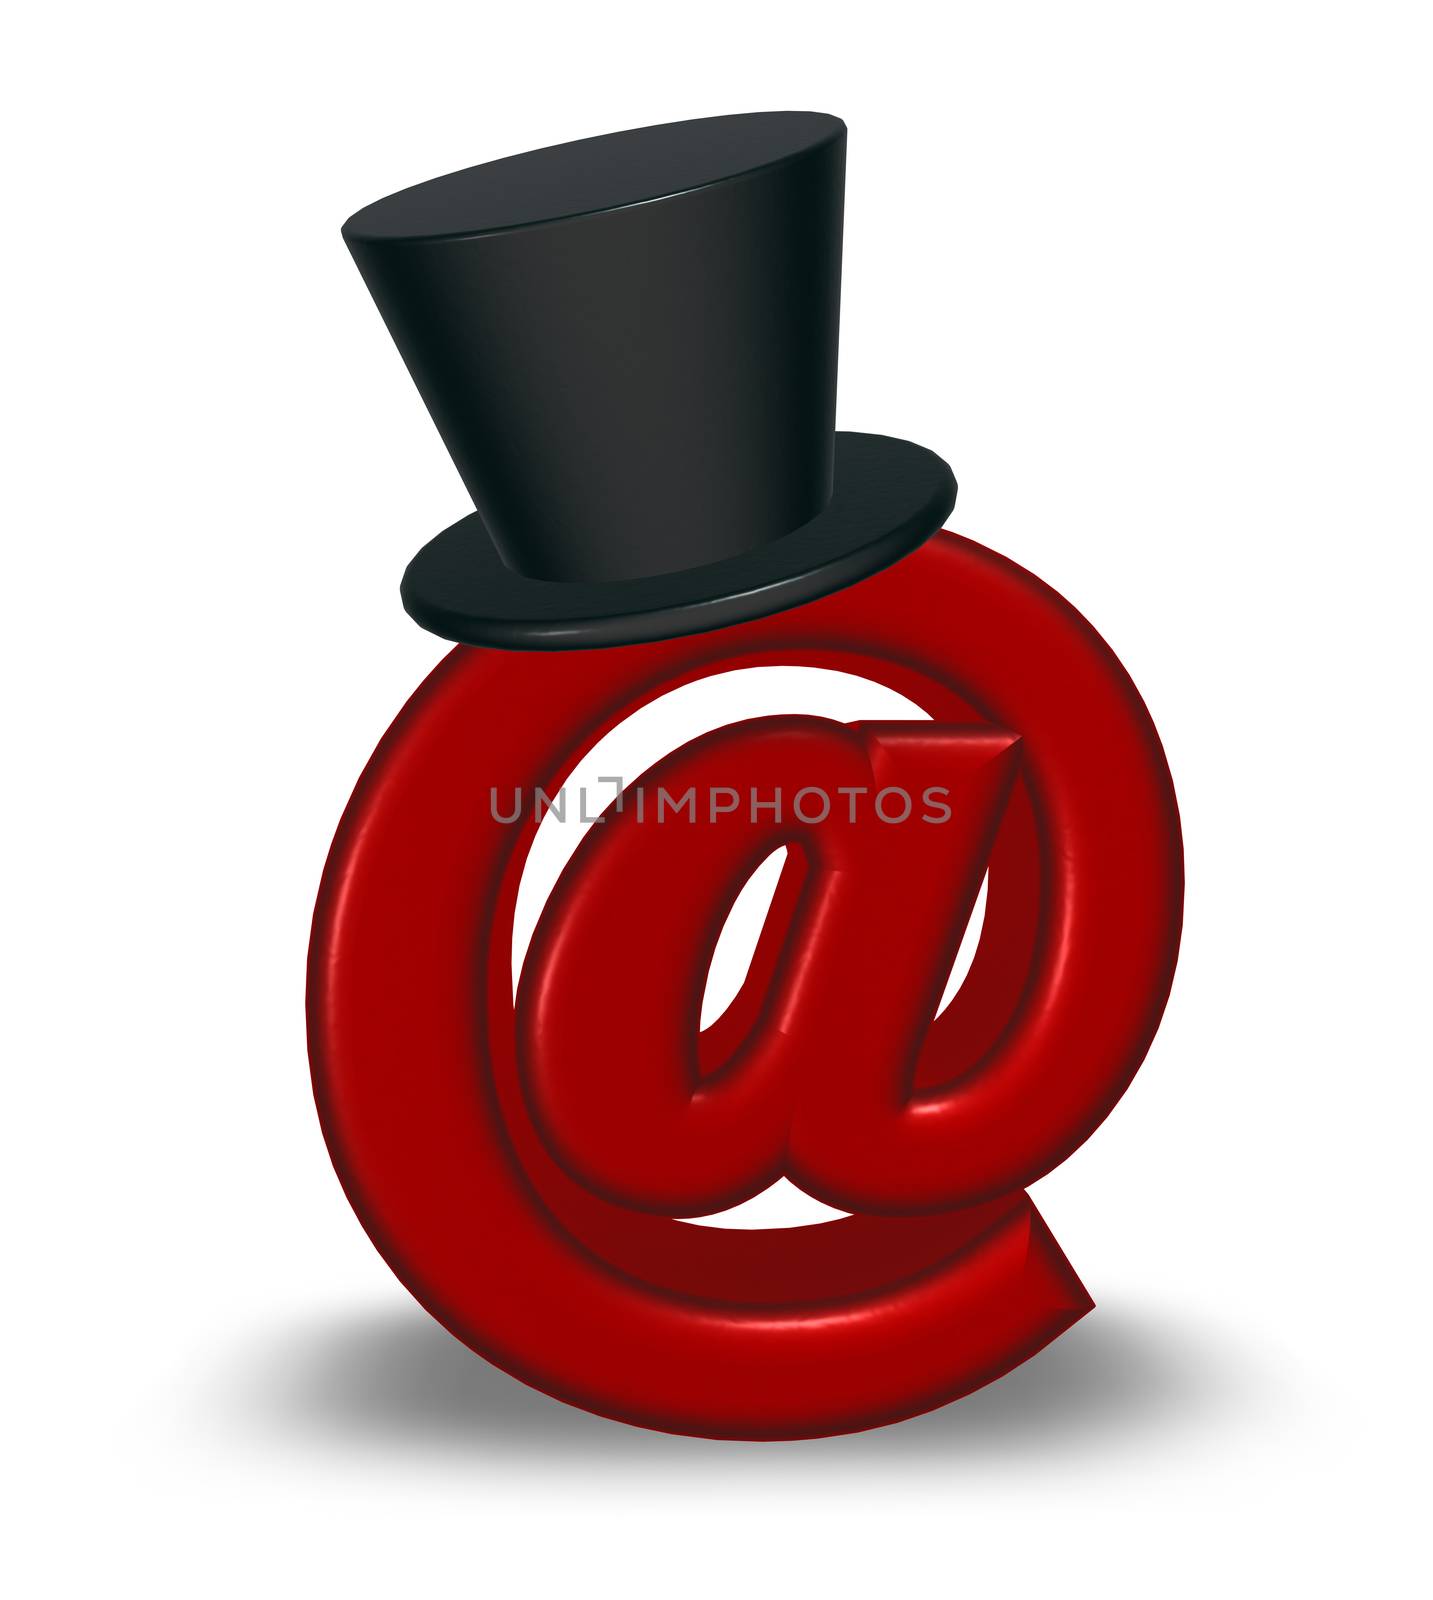 email symbol with topper by drizzd